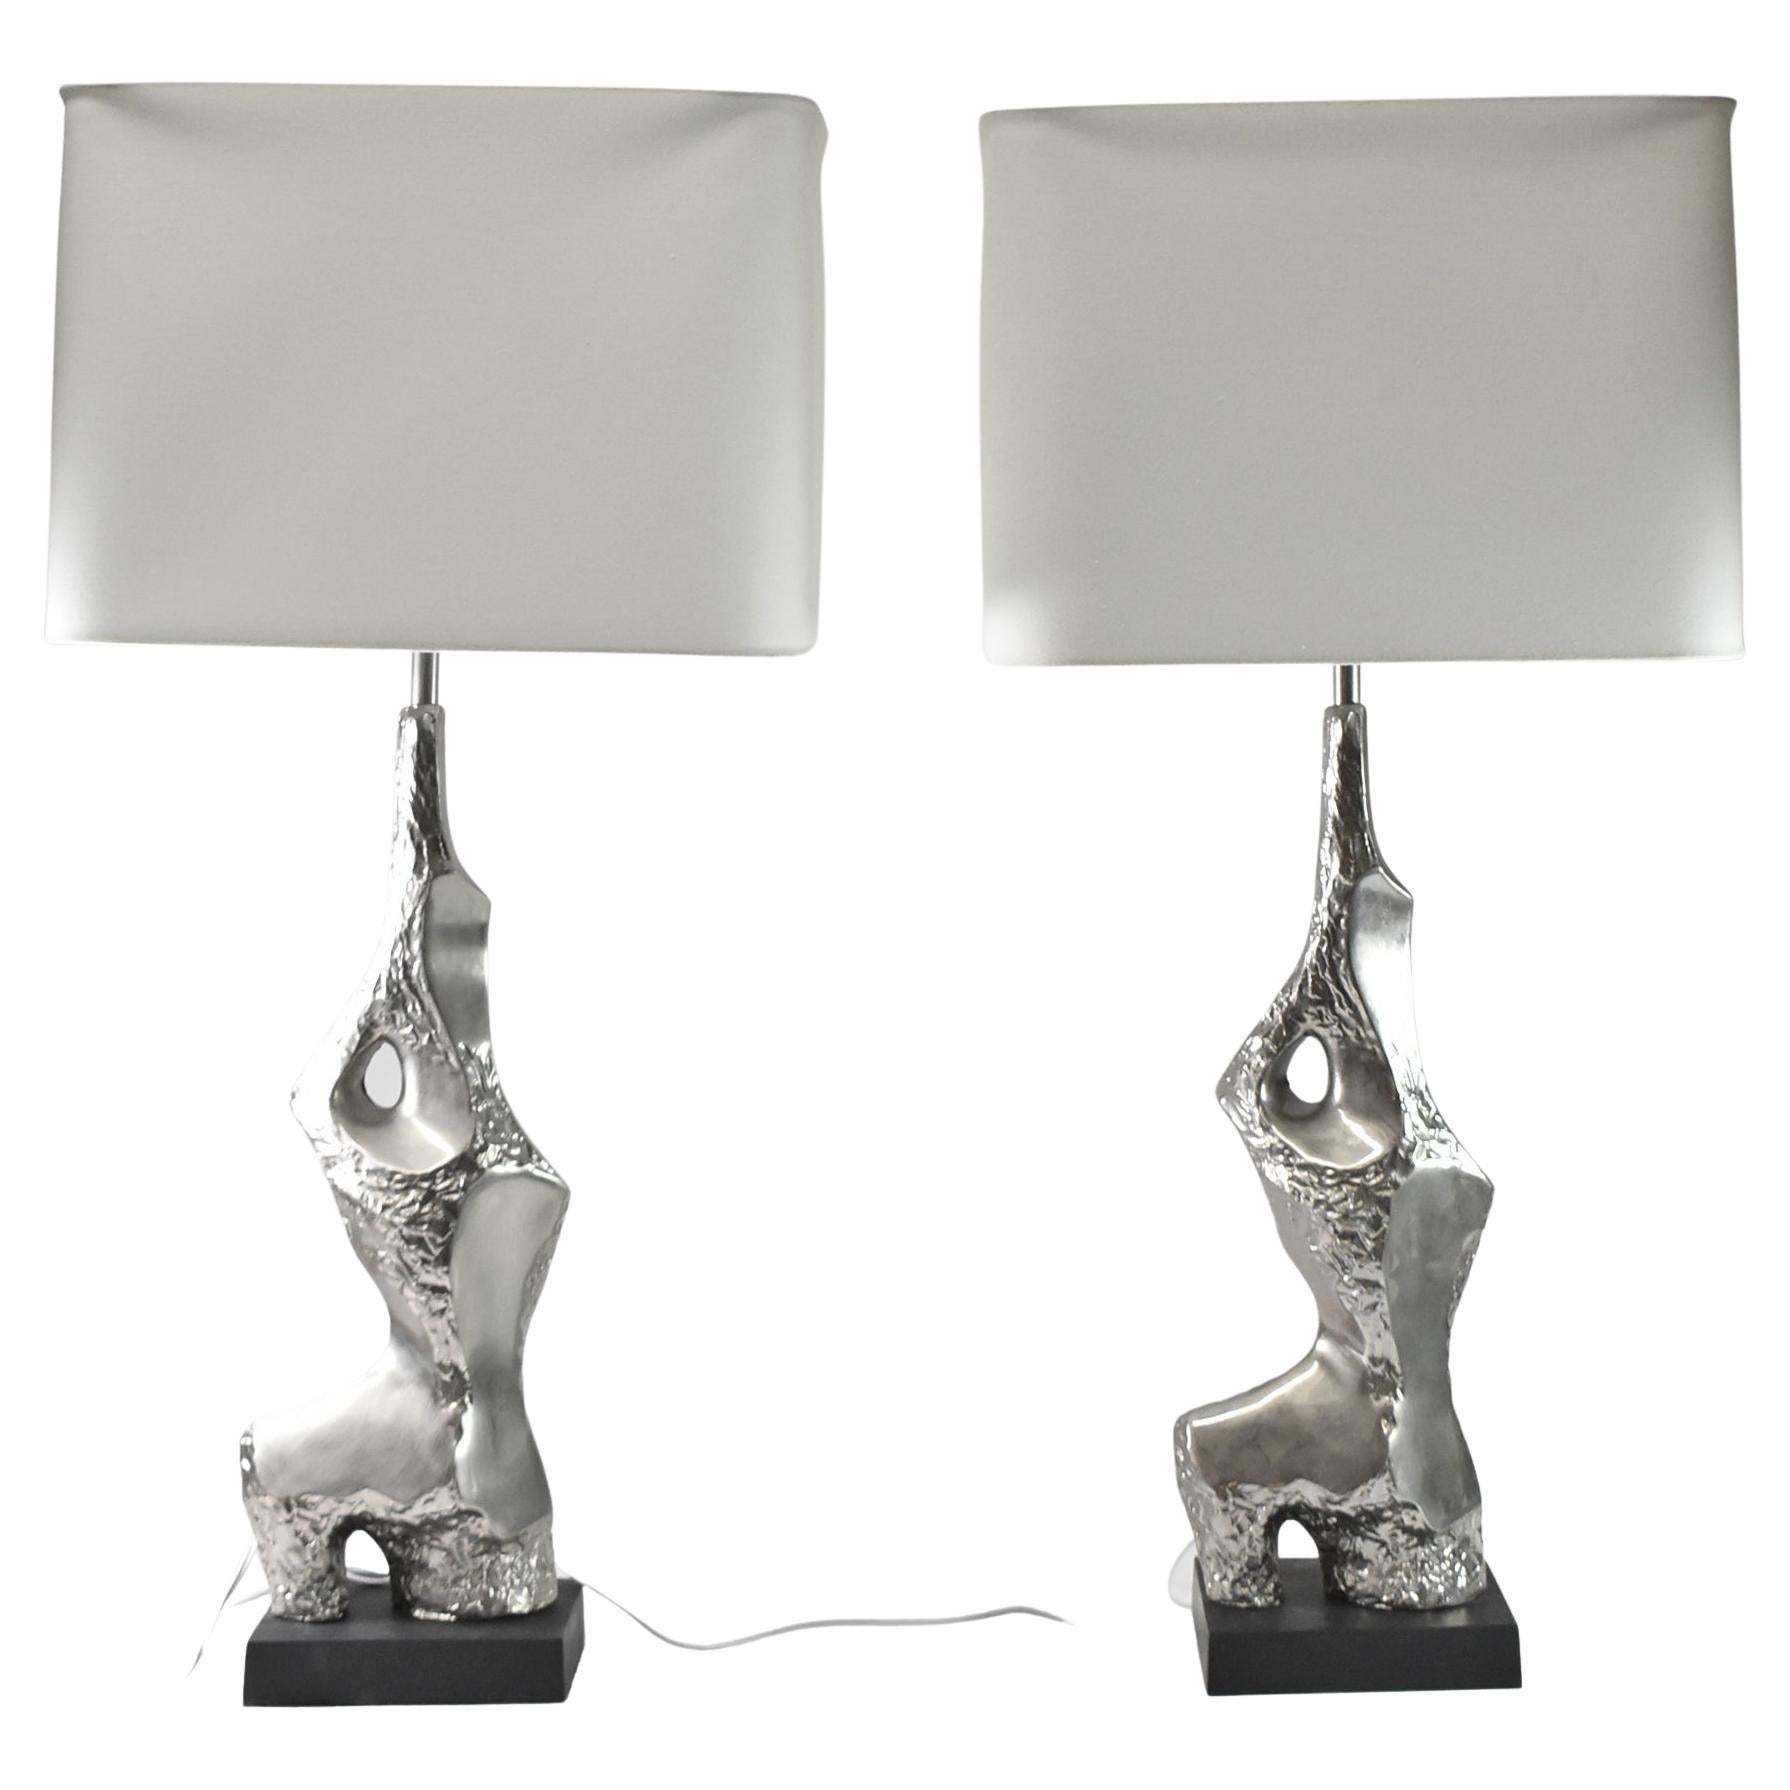 Pair of Laurel Chrome Vintage Table Lamps Brutalist Abstract by Richard Barr